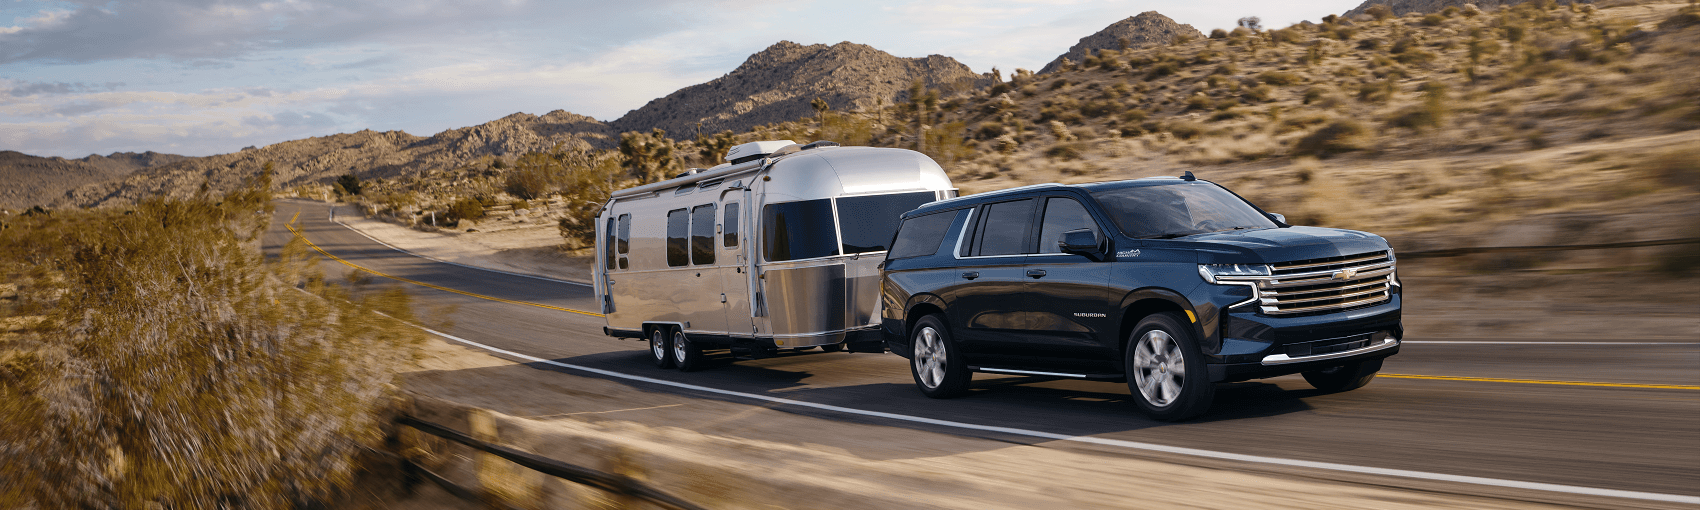 black chevy suburban towing airstream camper